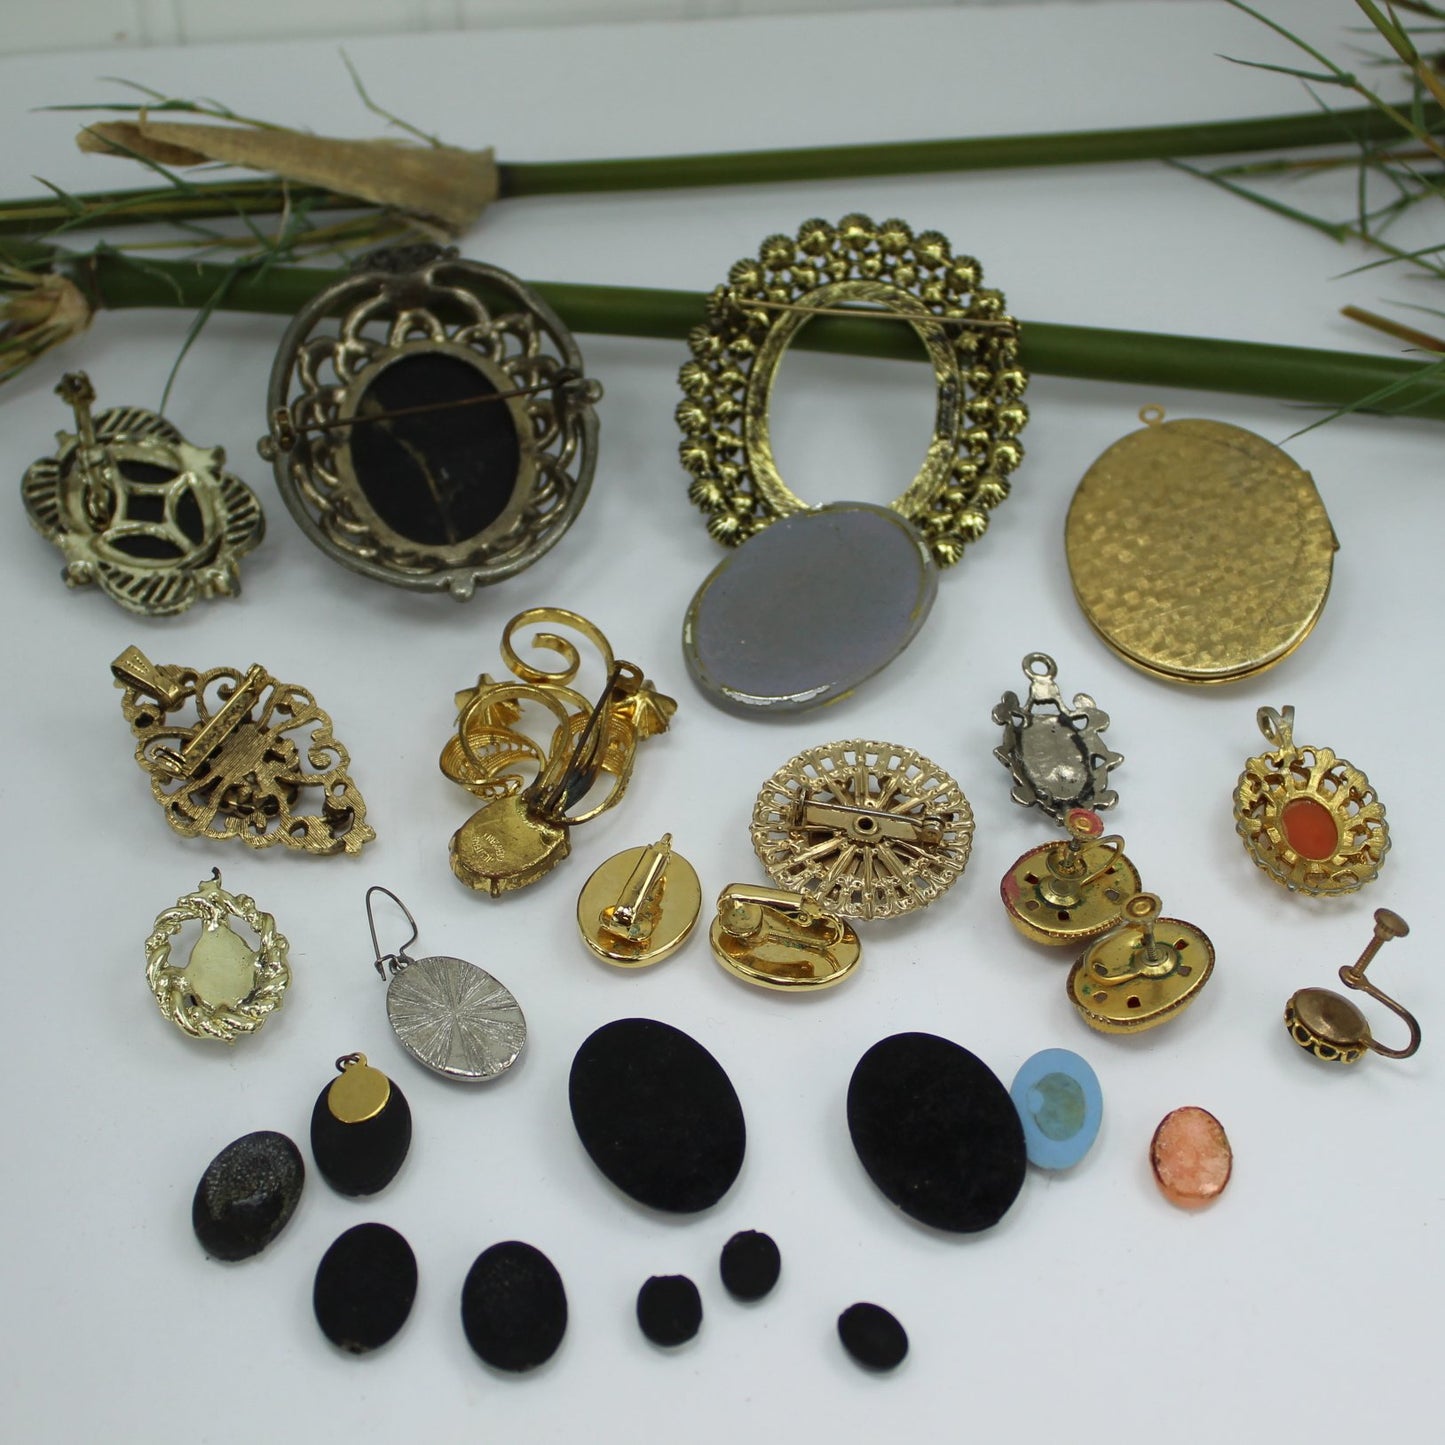 Collection Cameo Jewelry DIY Project Pins Earrings Lockets Repurpose reverse side collection lot